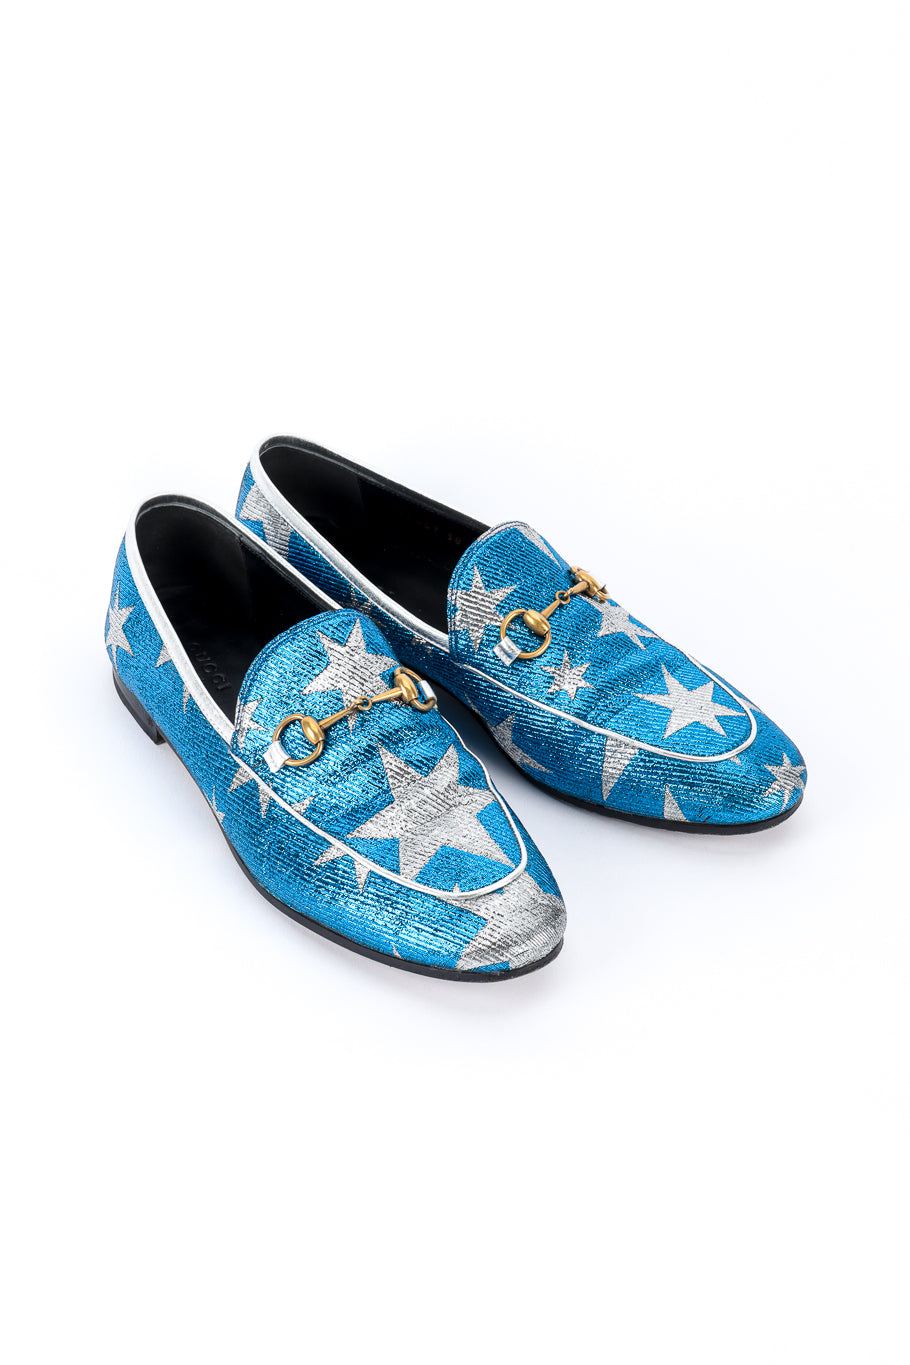 Gucci Starry Sky Lurex Loafers 3/4 front @recess la